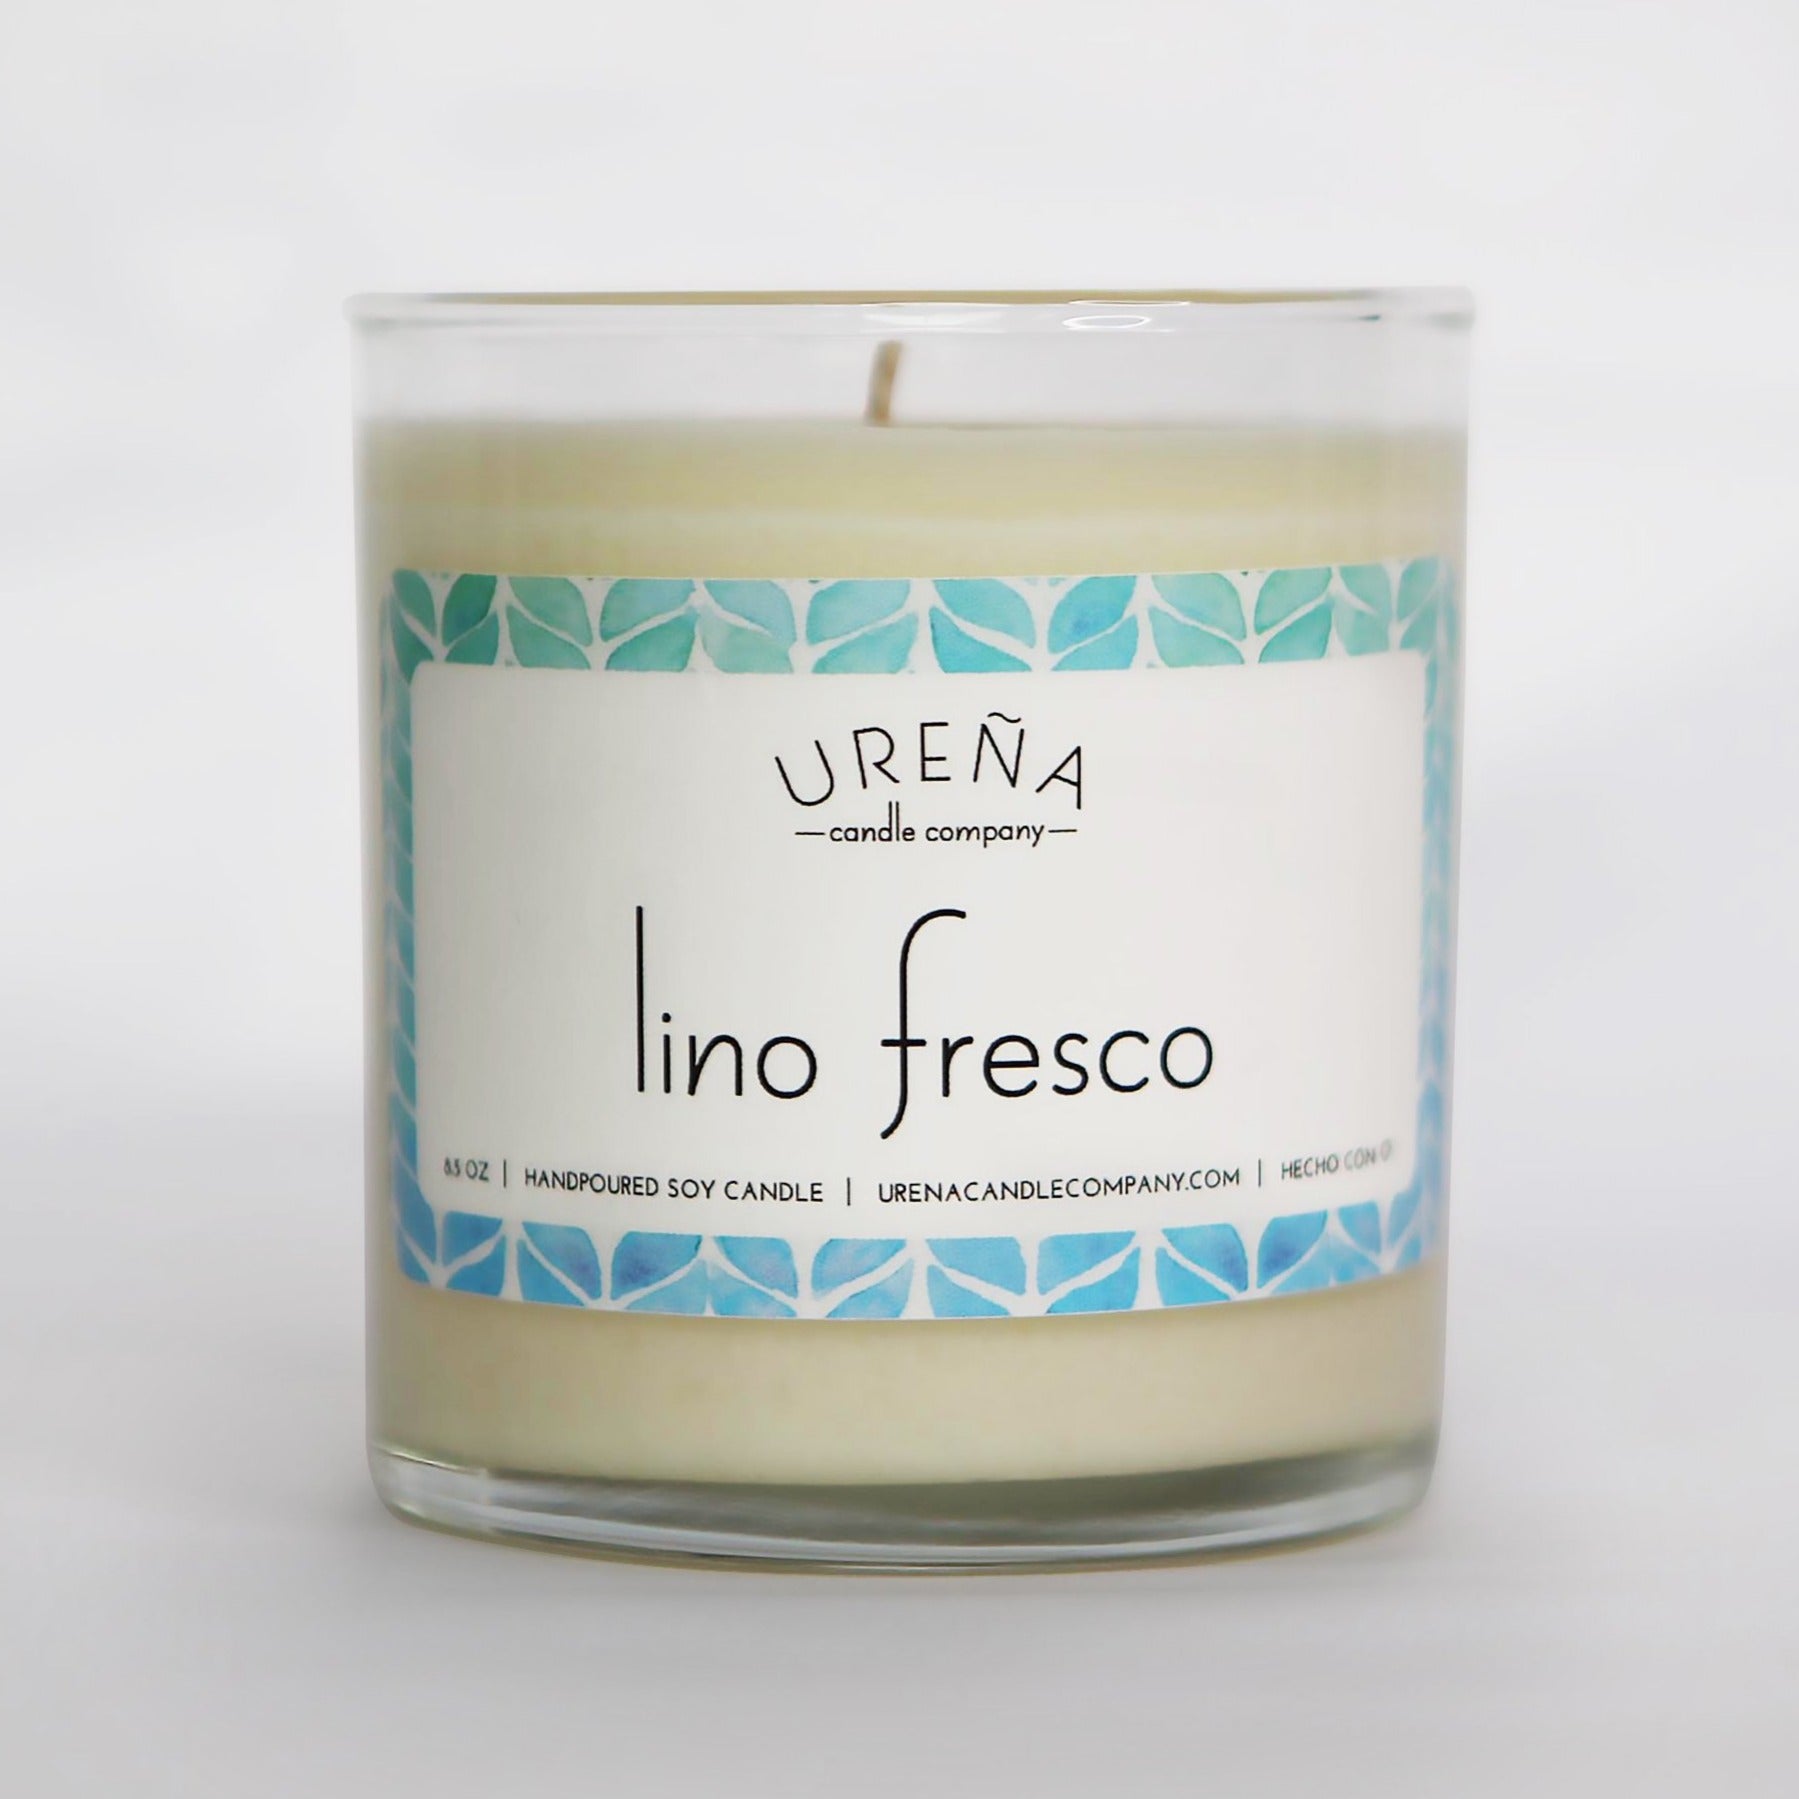 Fresh Linen Soy Candles